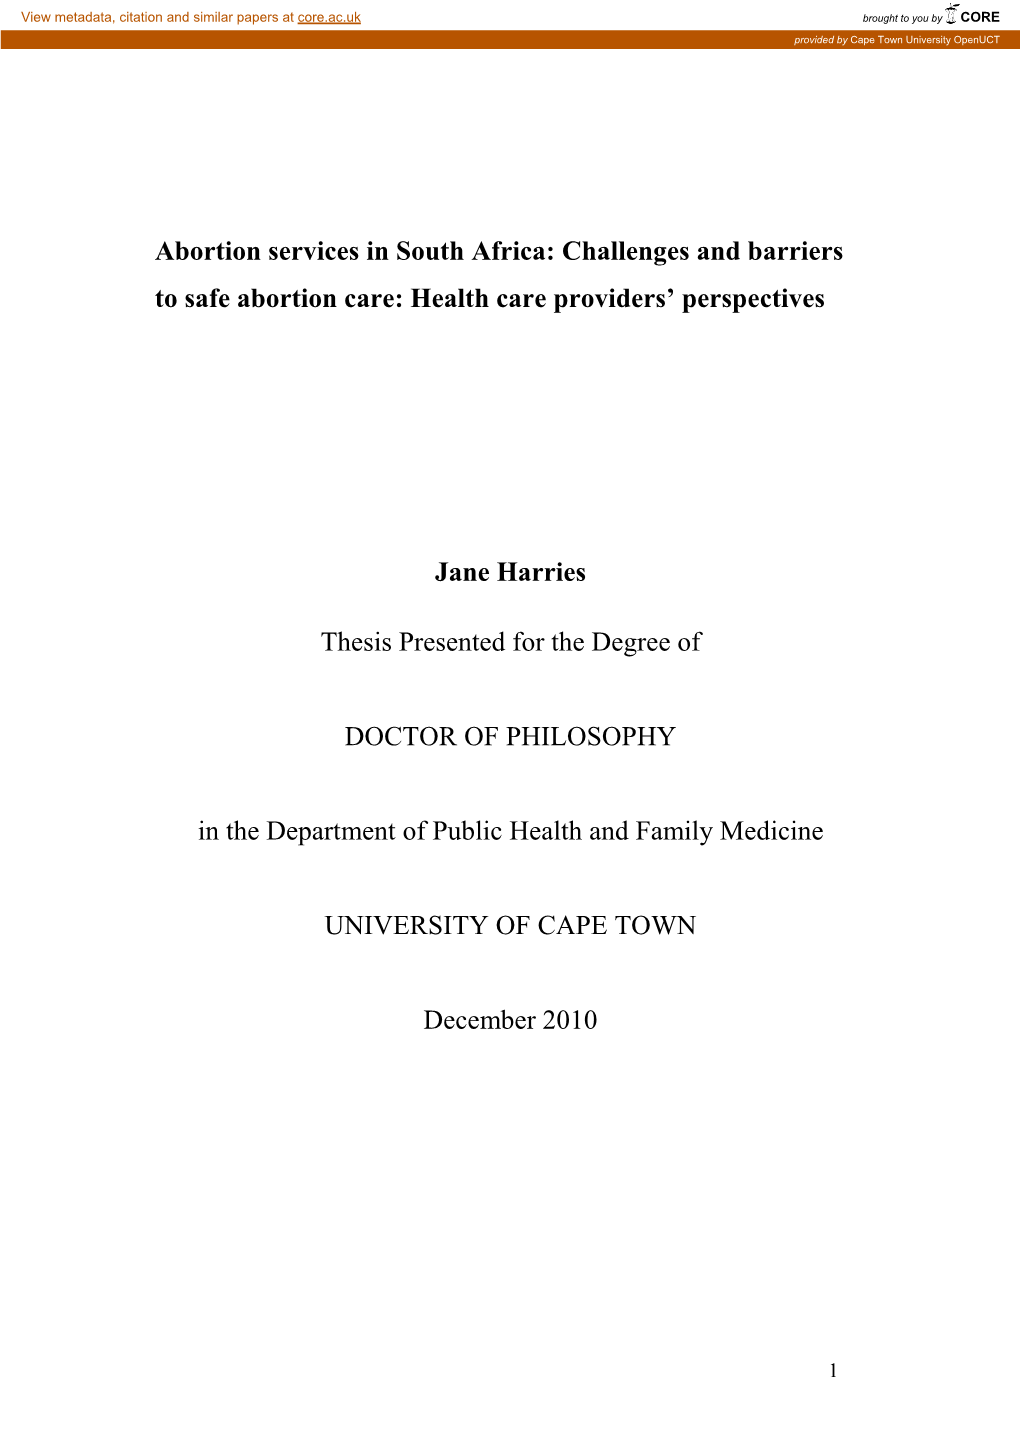 Abortion Services in South Africa: Challenges and Barriers to Safe Abortion Care: Health Care Providers’ Perspectives